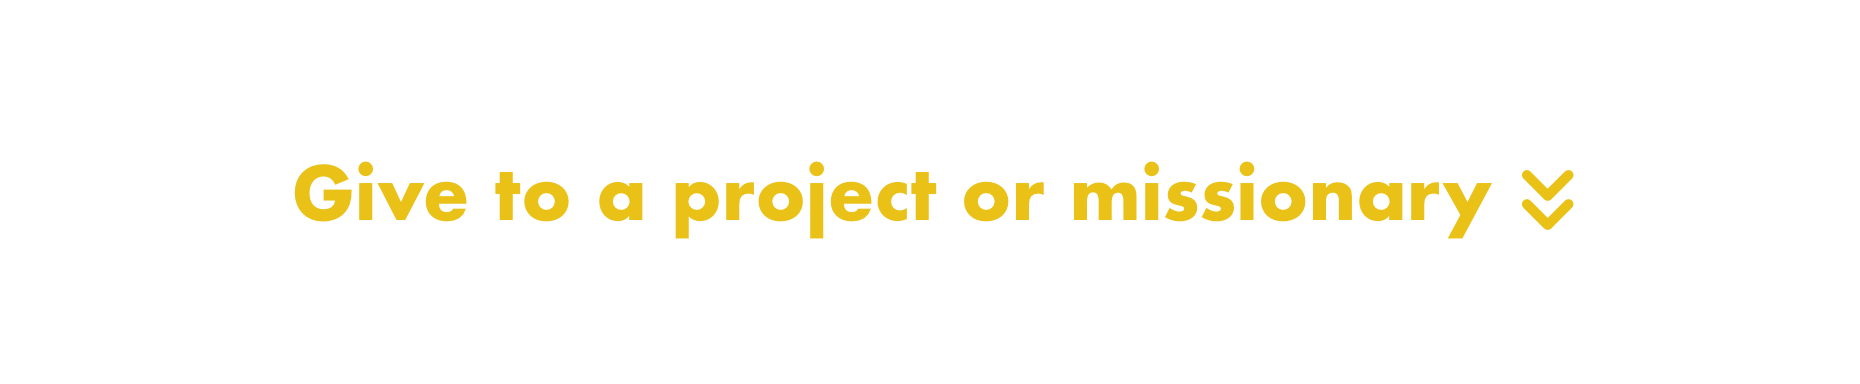 Give to a project or missionary